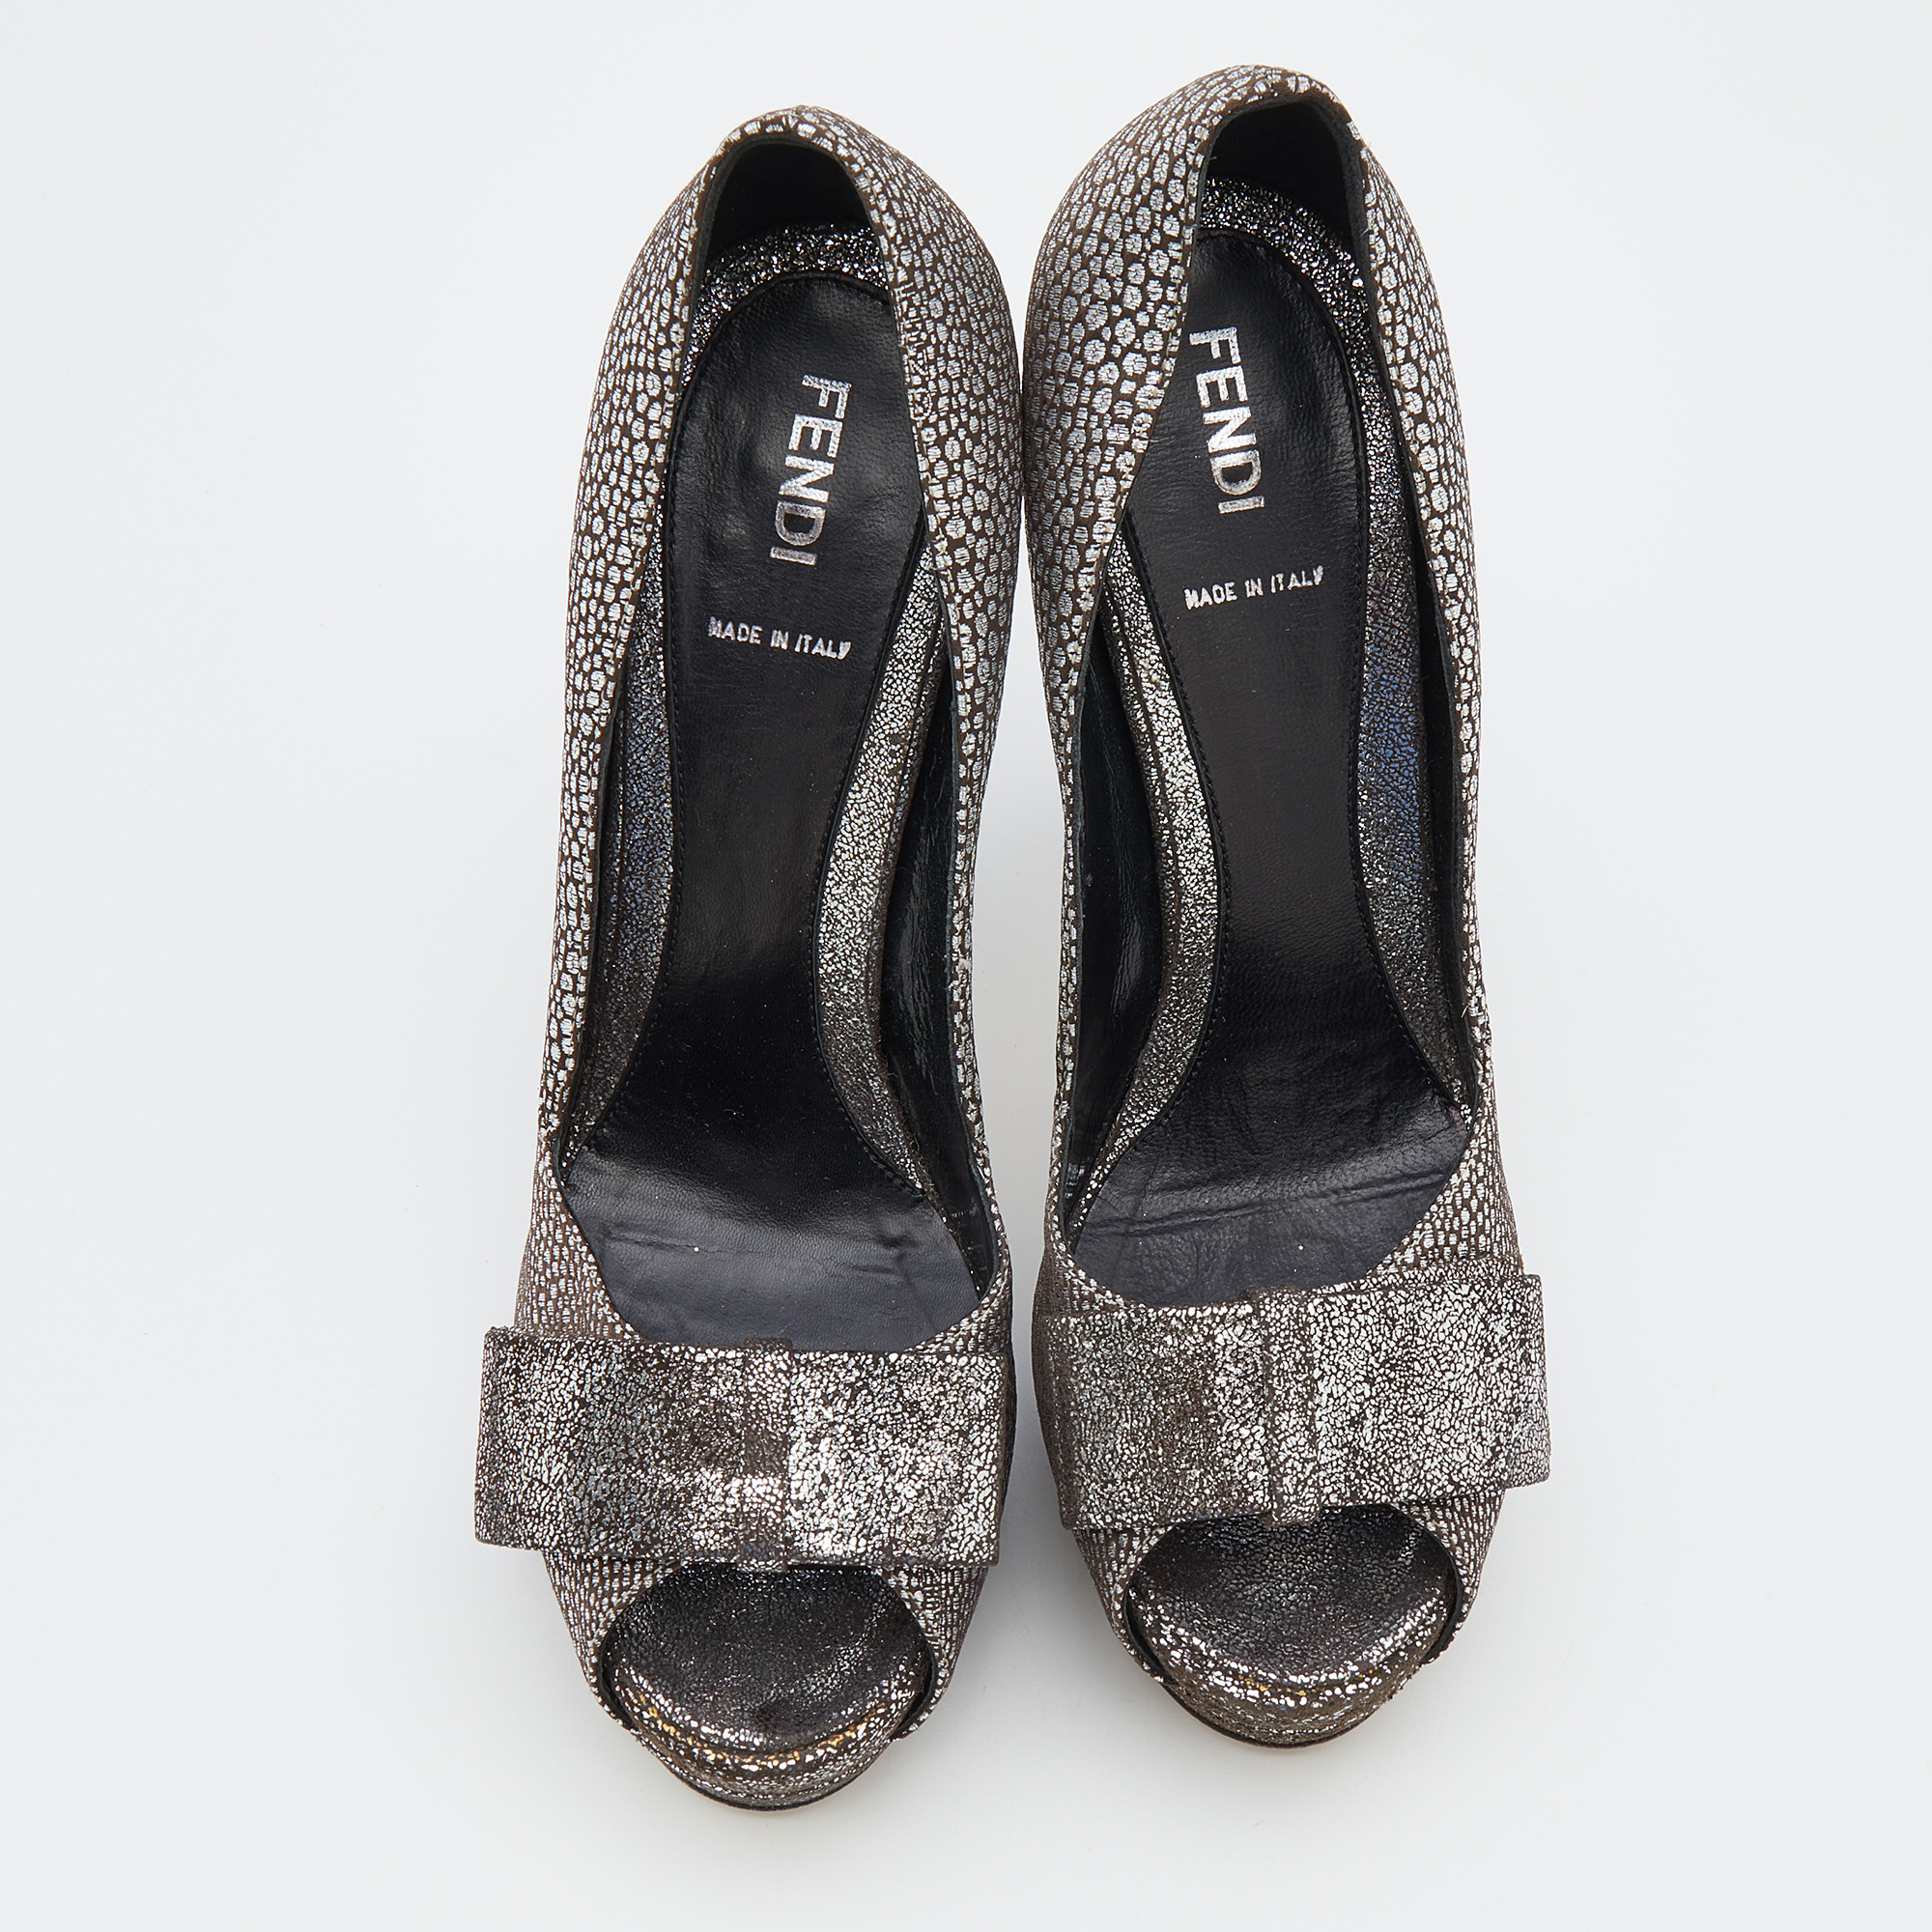 Fendi Silver/Grey Brocade Fabric And Leather Bow Open Toe Platform Pumps Size 38